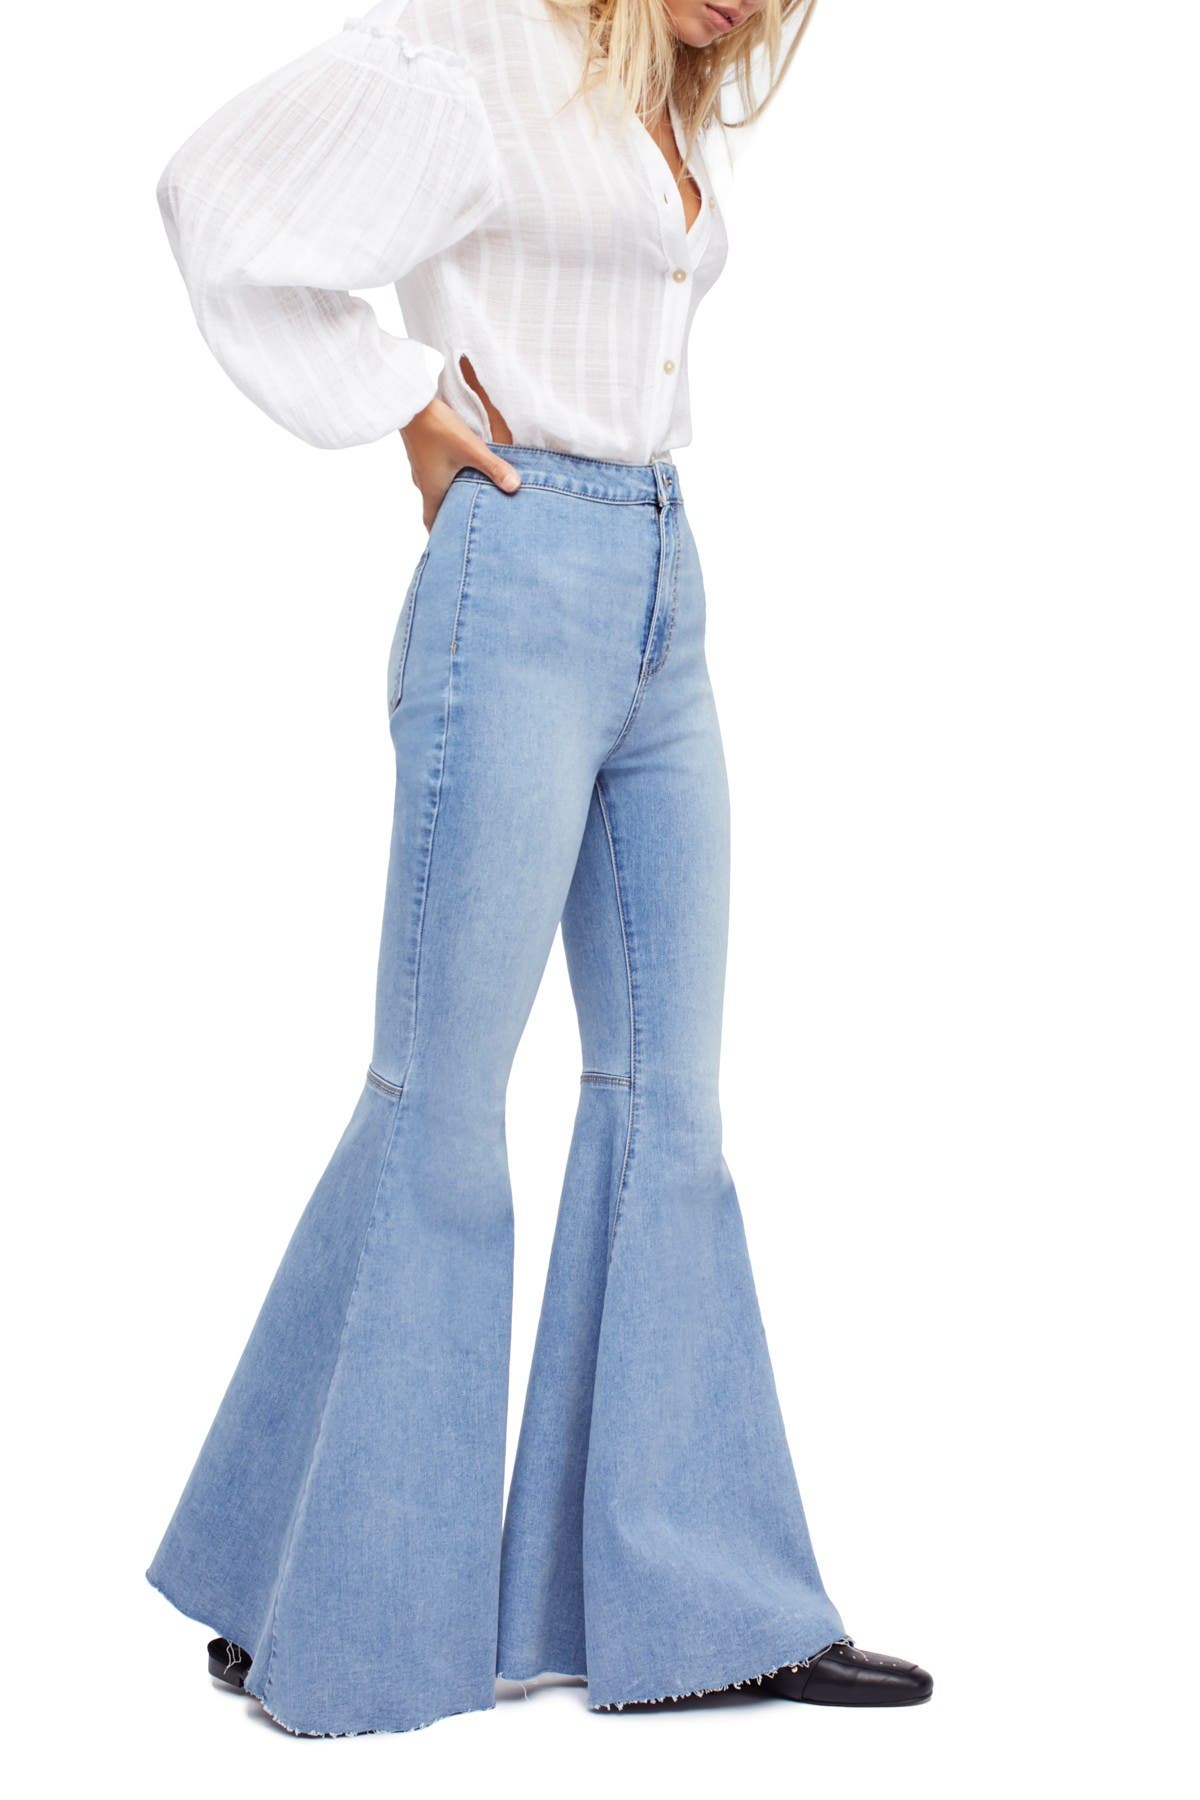 free people bell bottom jeans